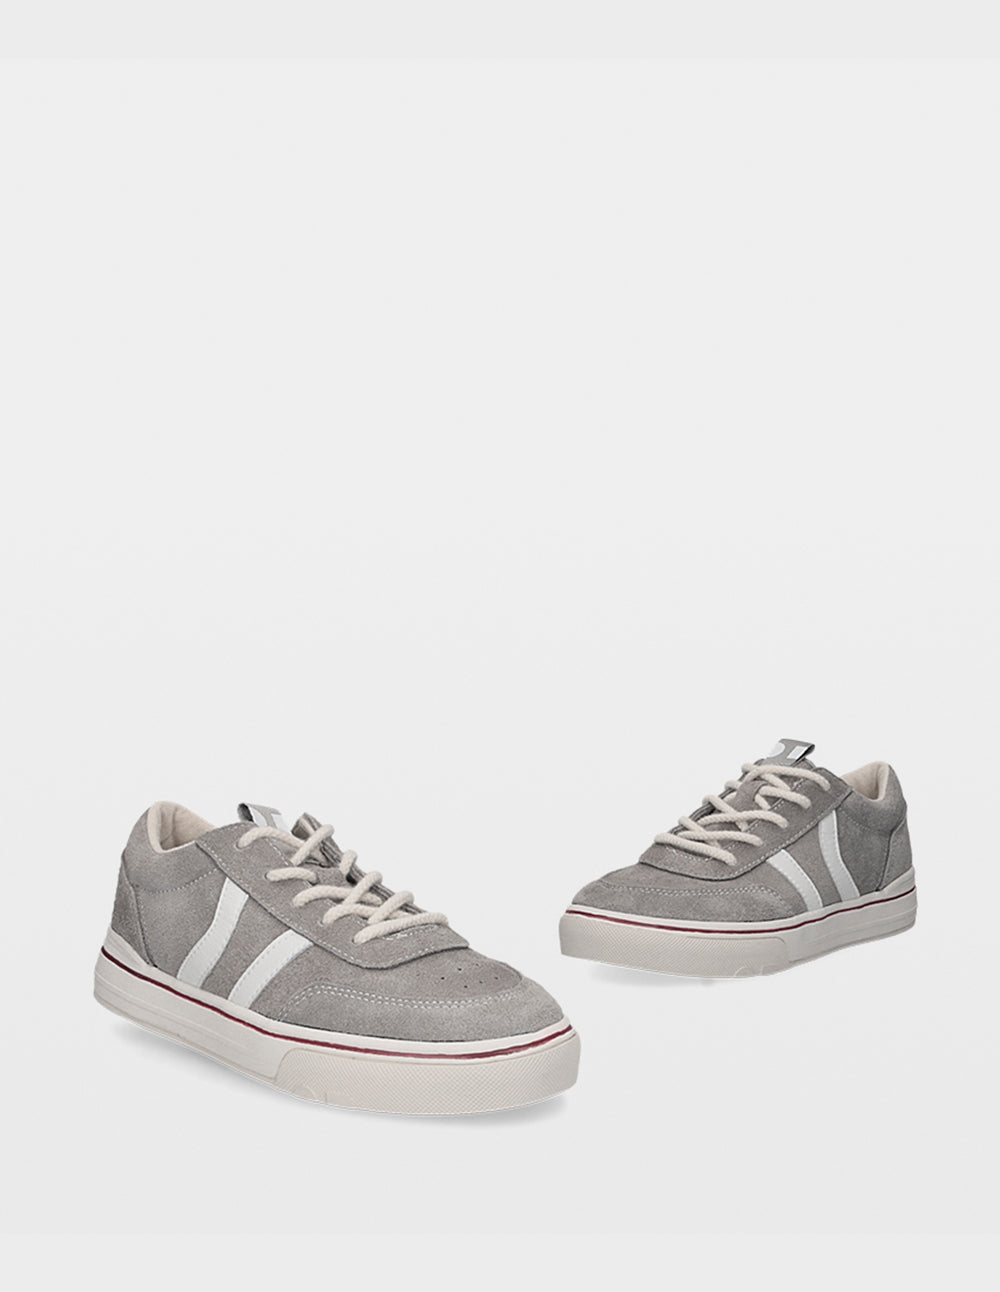 OLIE-LOW GREY LEATHER HOMBRE